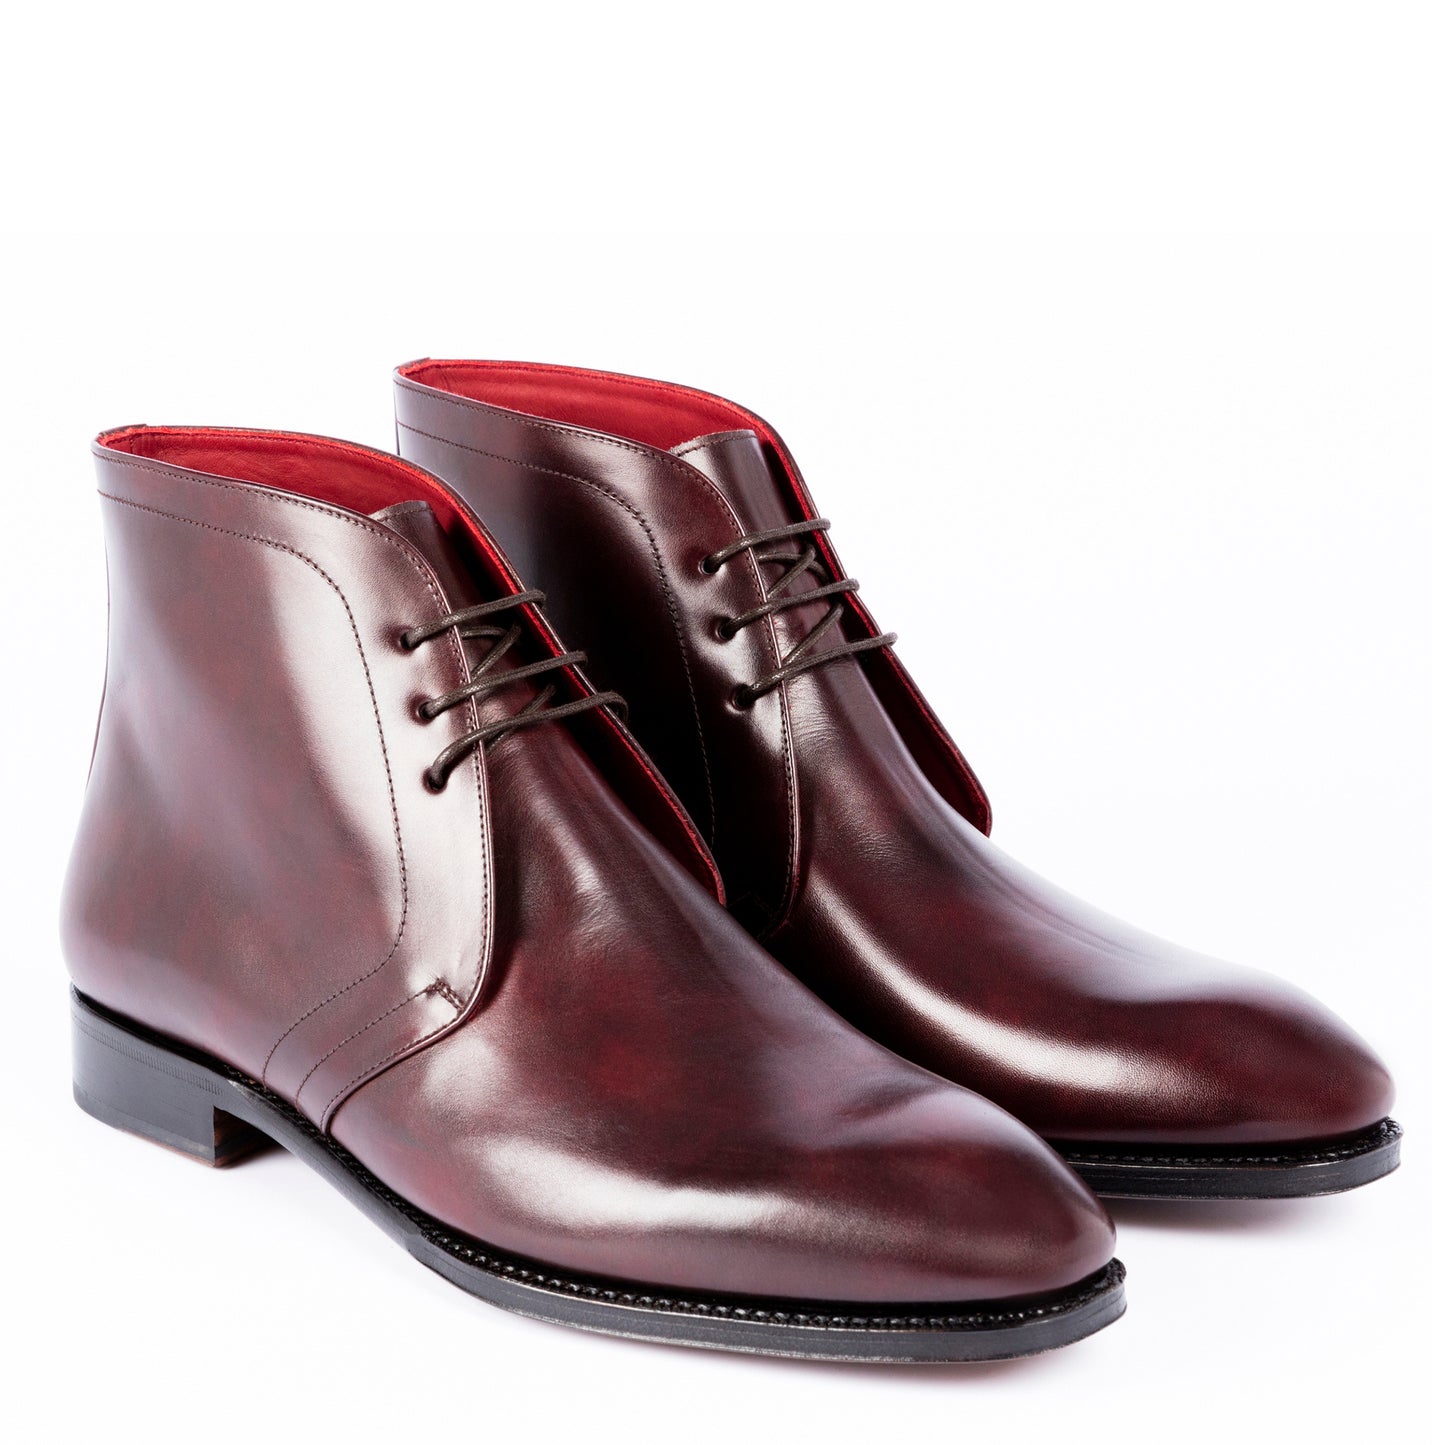 TLB Mallorca leather shoes 574 / ALAN / OLD ENGLAND BURGUNDY